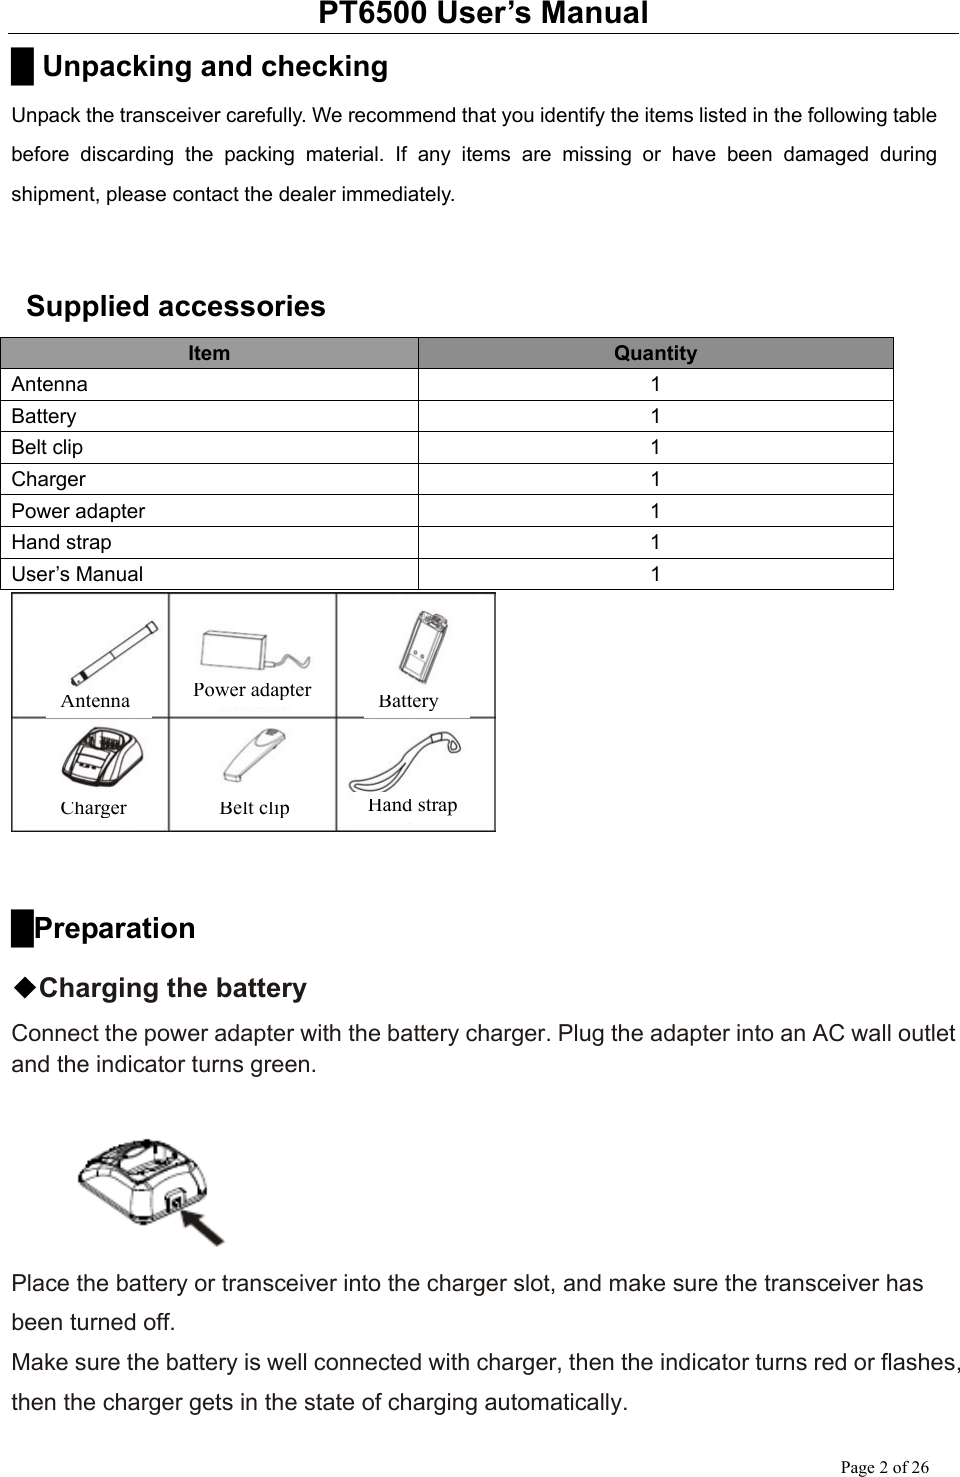 PT6500 User’s Manual Page 2 of 26 █ Unpacking and checking Unpack the transceiver carefully. We recommend that you identify the items listed in the following table before discarding the packing material. If any items are missing or have been damaged during shipment, please contact the dealer immediately.    Supplied accessories Item  Quantity Antenna 1 Battery 1 Belt clip  1 Charger 1 Power adapter  1 Hand strap  1 User’s Manual  1   █Preparation ◆Charging the battery Connect the power adapter with the battery charger. Plug the adapter into an AC wall outlet and the indicator turns green.   Place the battery or transceiver into the charger slot, and make sure the transceiver has been turned off.   Make sure the battery is well connected with charger, then the indicator turns red or flashes, then the charger gets in the state of charging automatically. Antenna Power adapter BatteryCharger Belt clip Hand strap